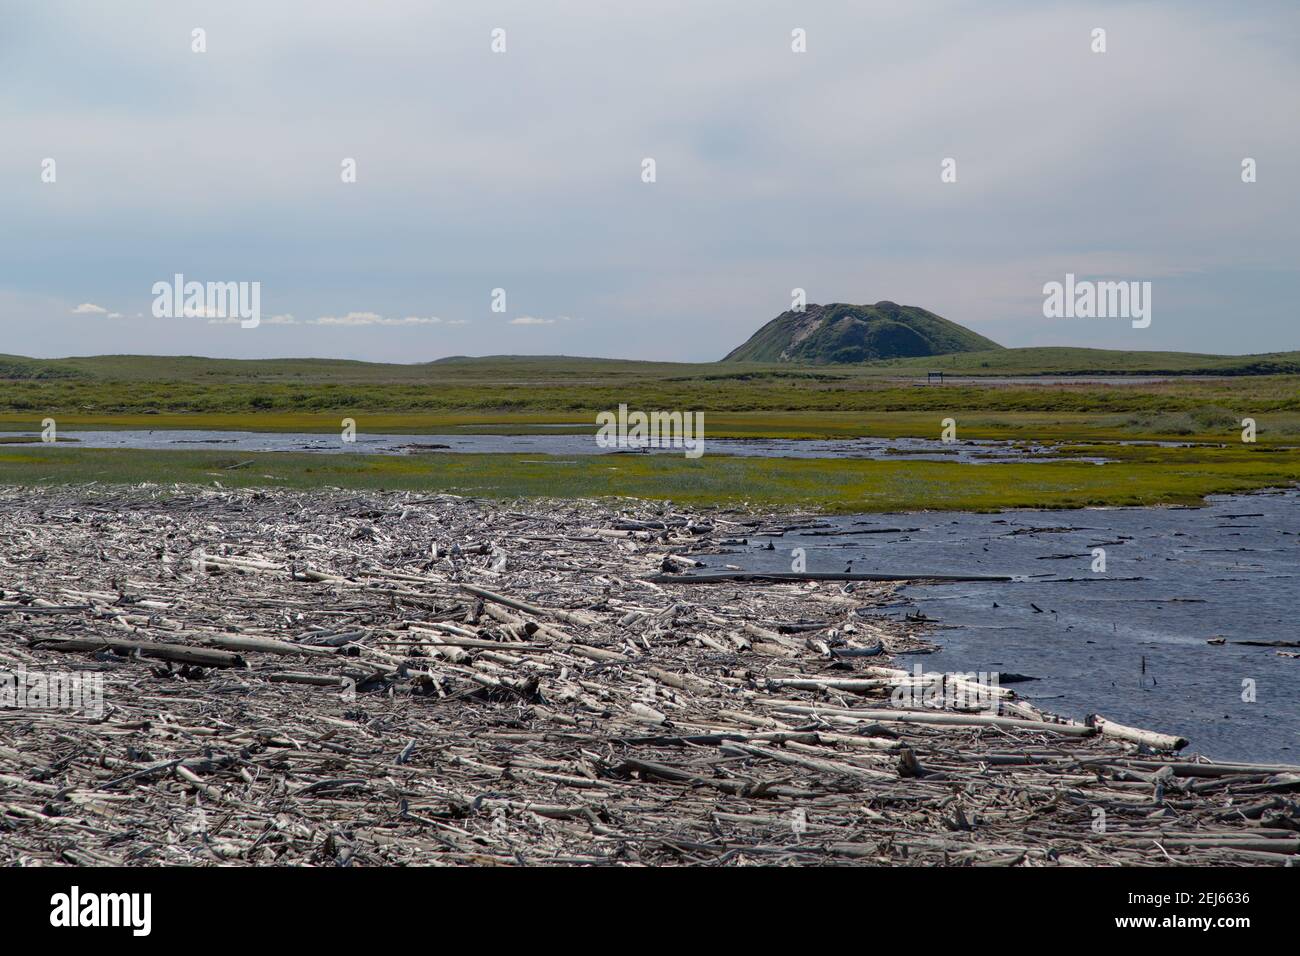 A pingo landmark (intra-permafrost ice-cored hill) in the summer on the arctic landscape outside Tuktoyaktuk, Northwest Territories, Canada's Arctic. Stock Photo